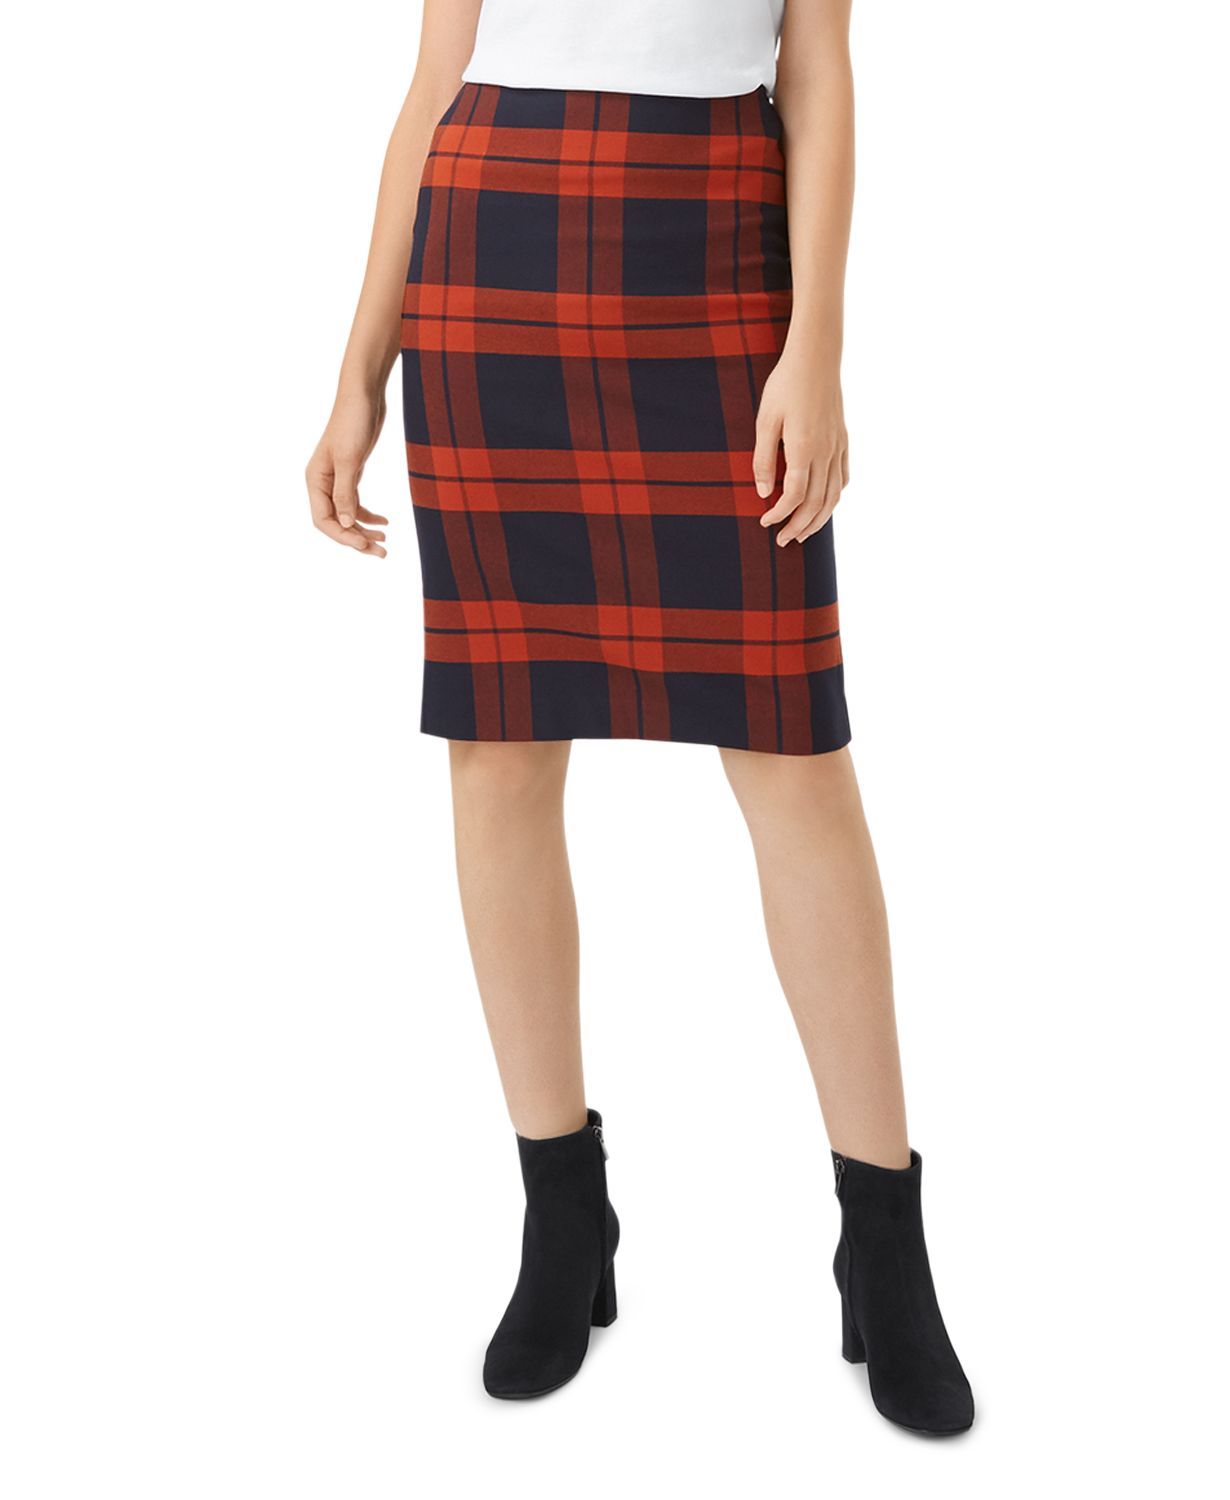 red plaid skirt and top